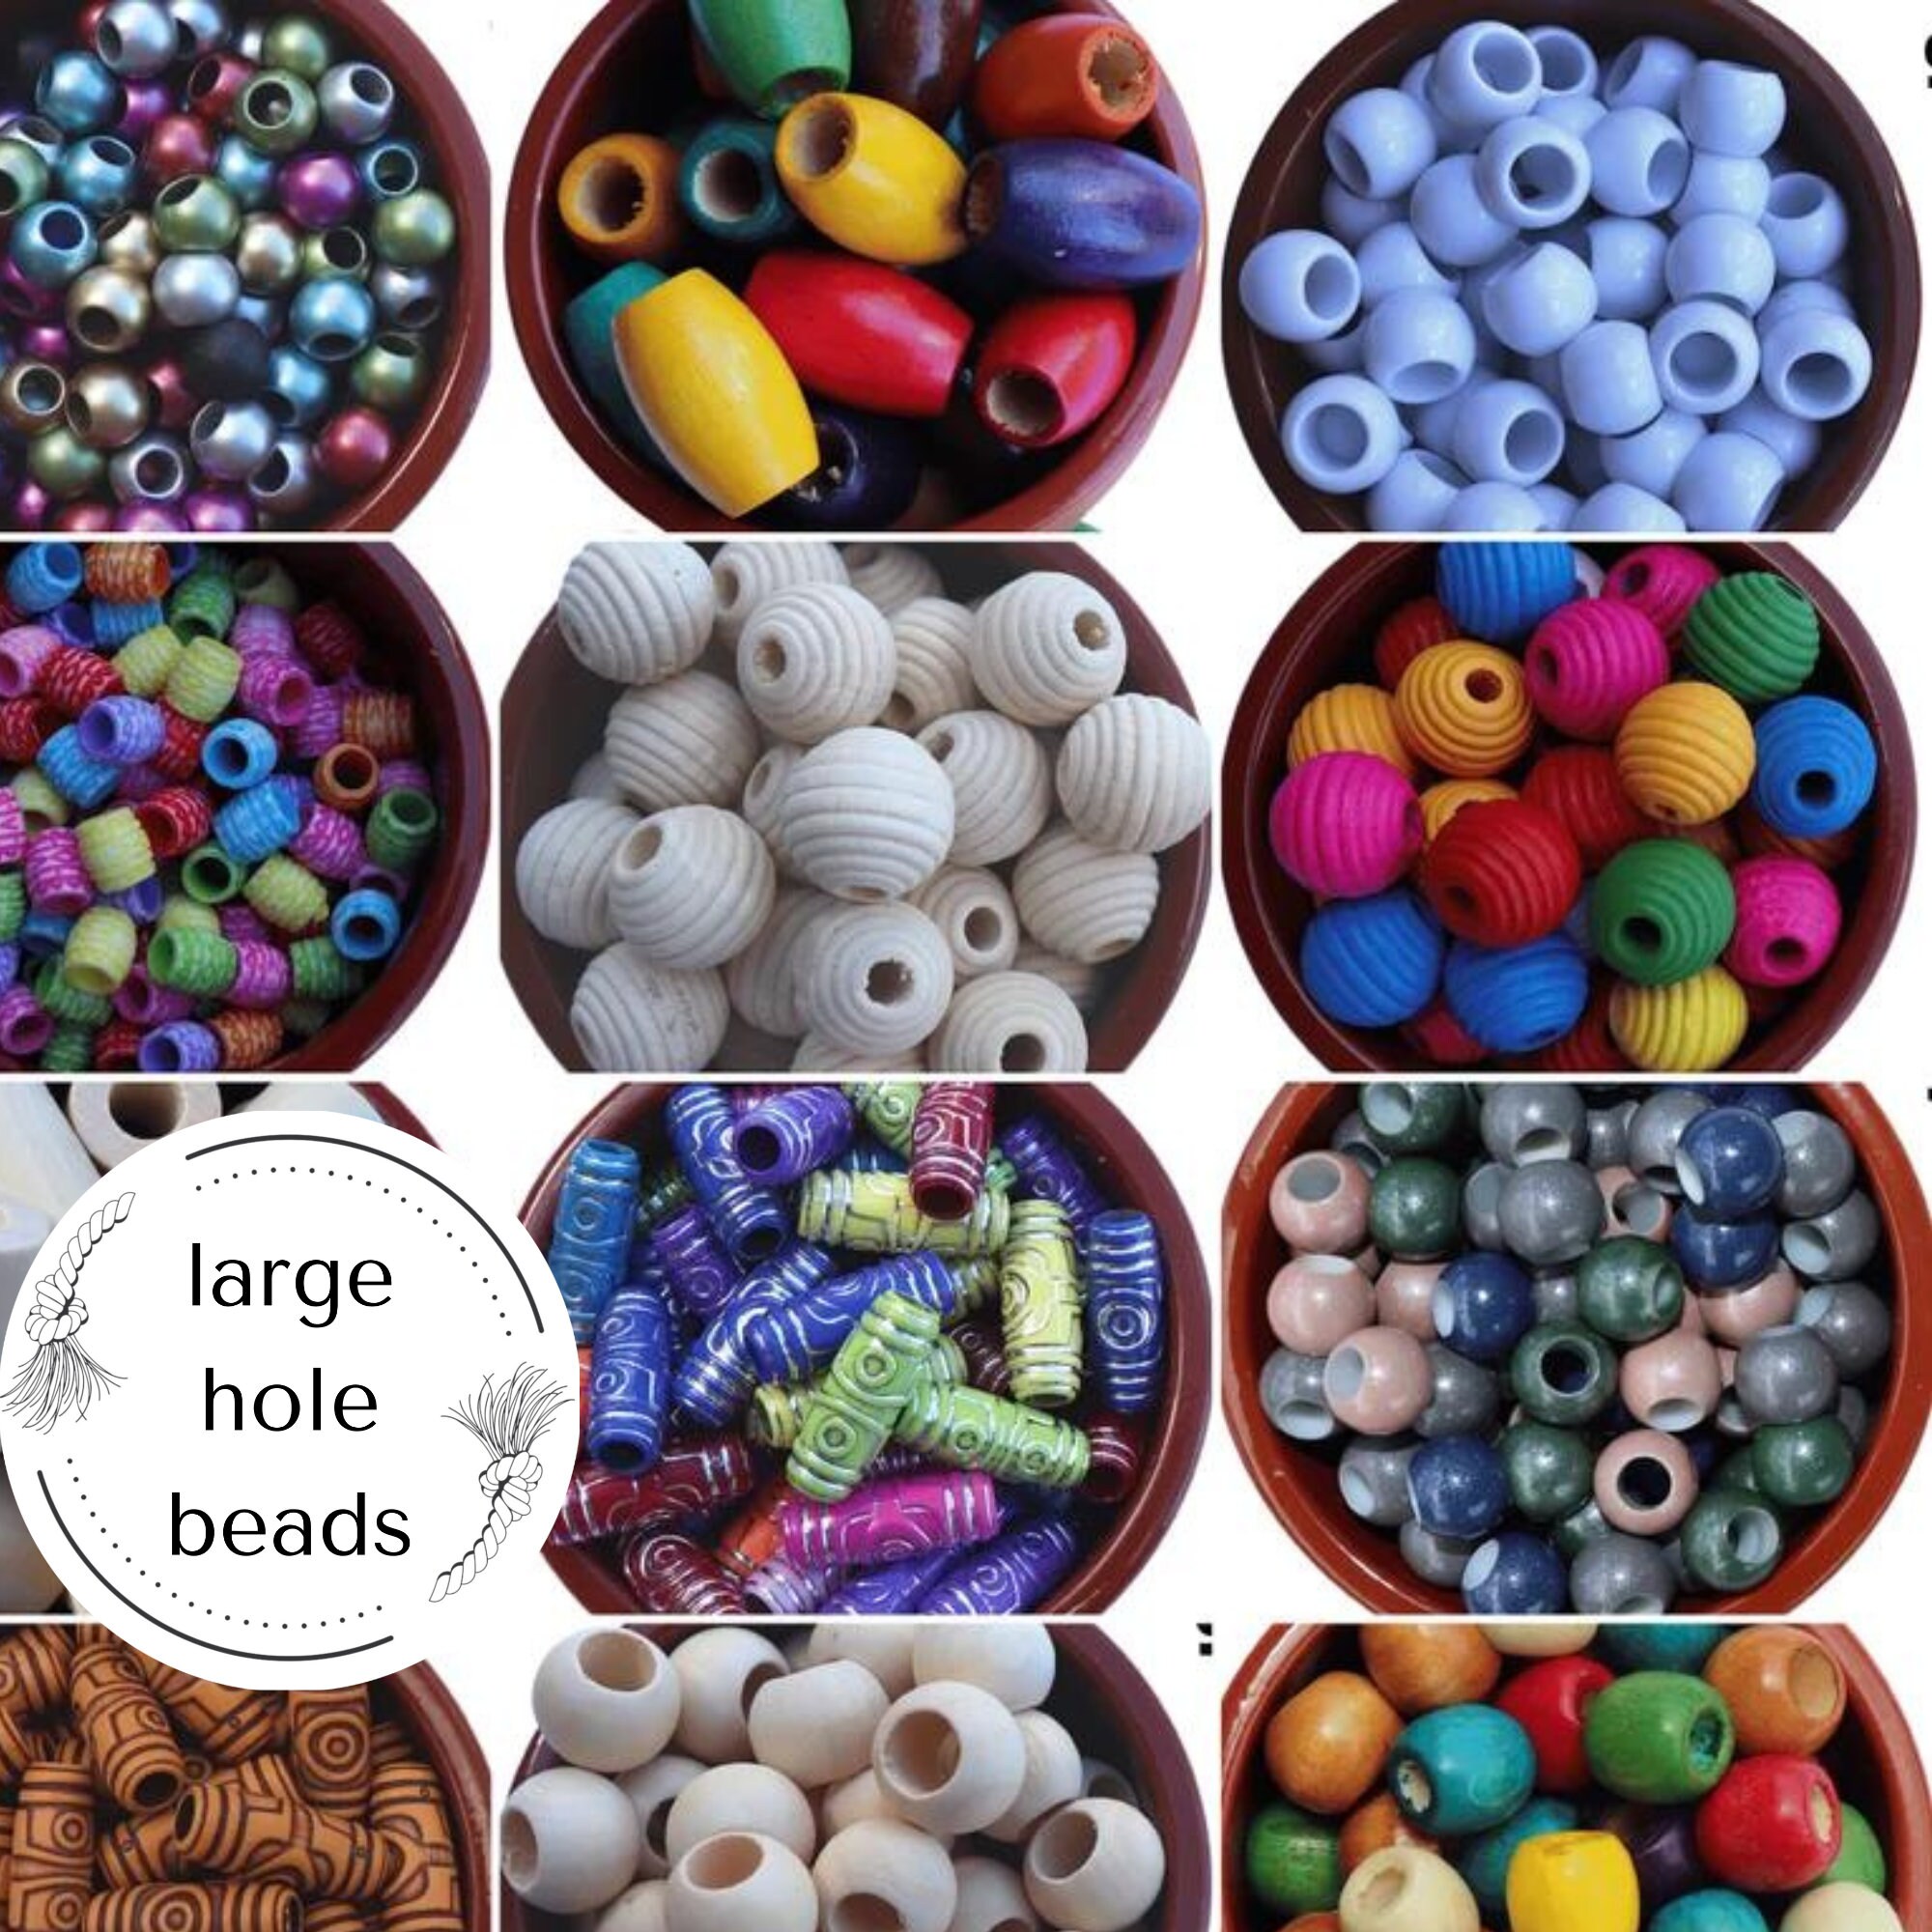 4000pcs White Clay Beads 0.24inch/6mm